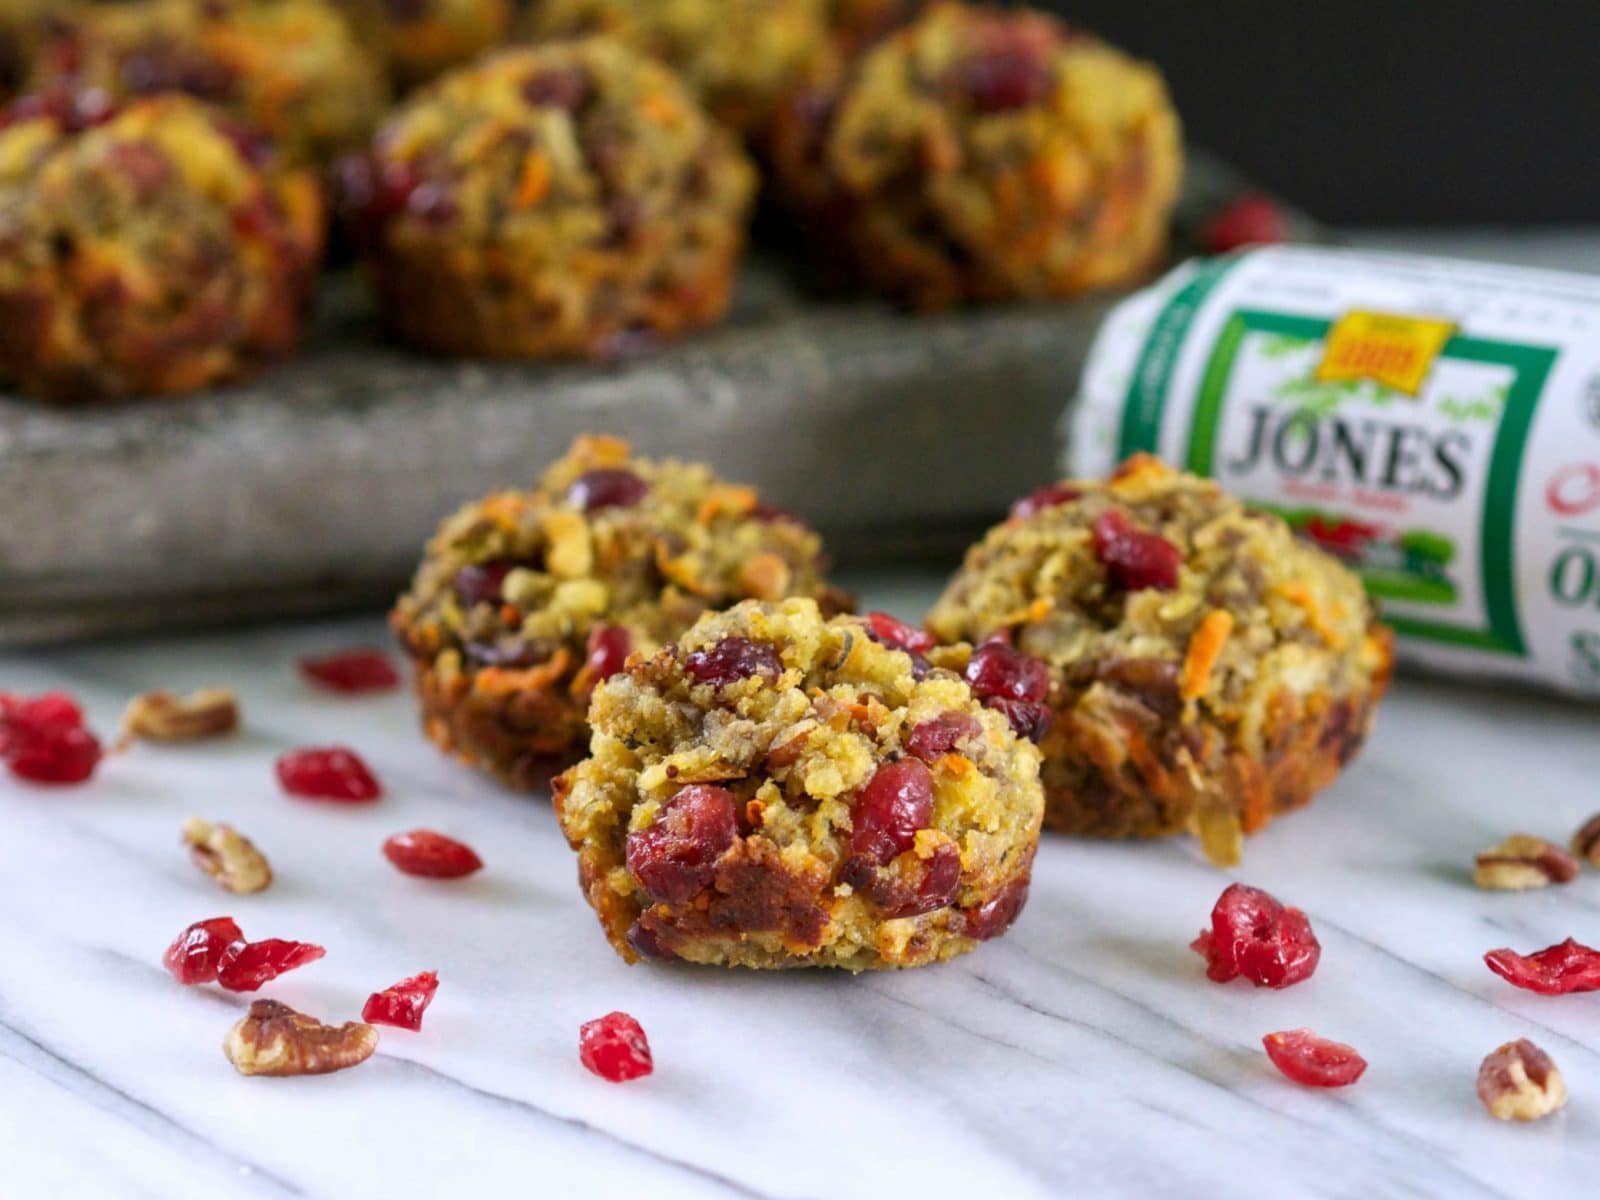 Cranberry and Cornbread Stuffing Muffins with Jones Sausage. Cornbread stuffing mixed with sausage, dried cranberries, shredded carrots & toasted pecans. Simply Sated